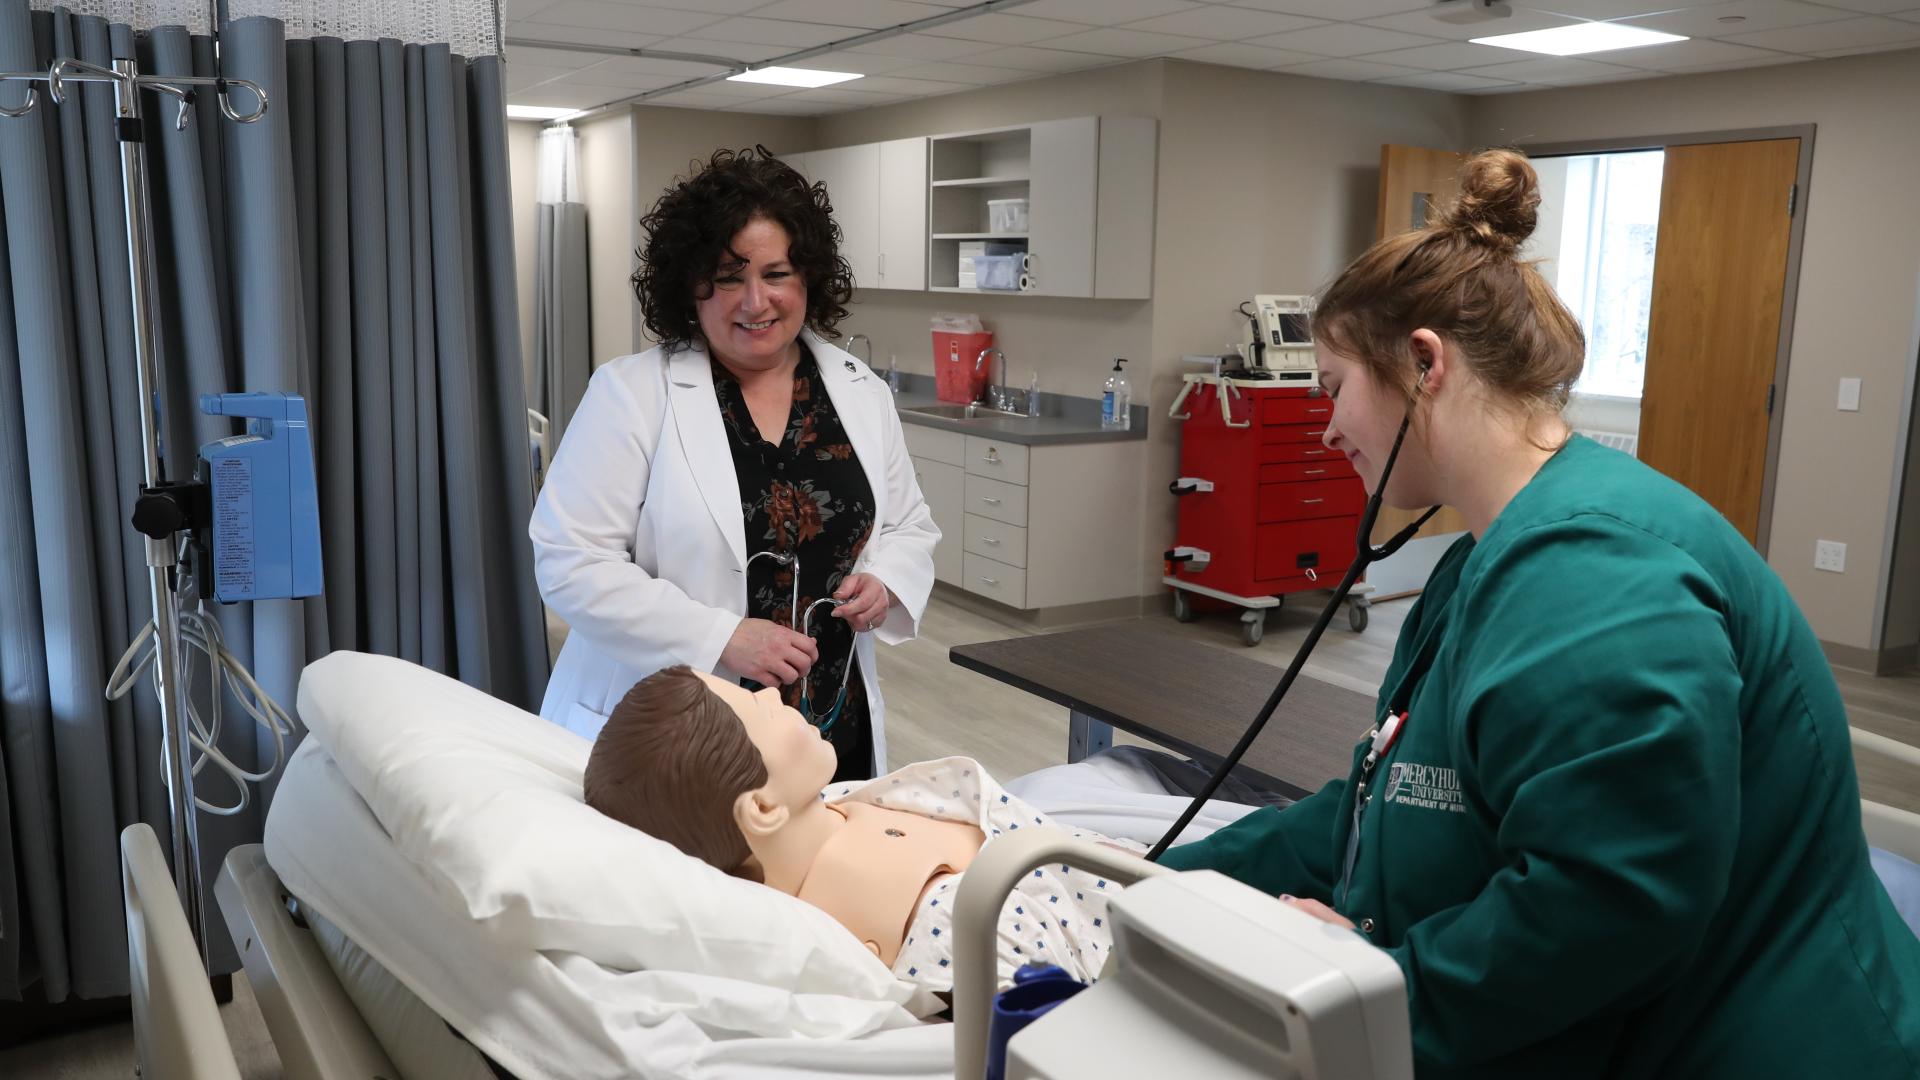 Nursing instructor and student examining mannequin